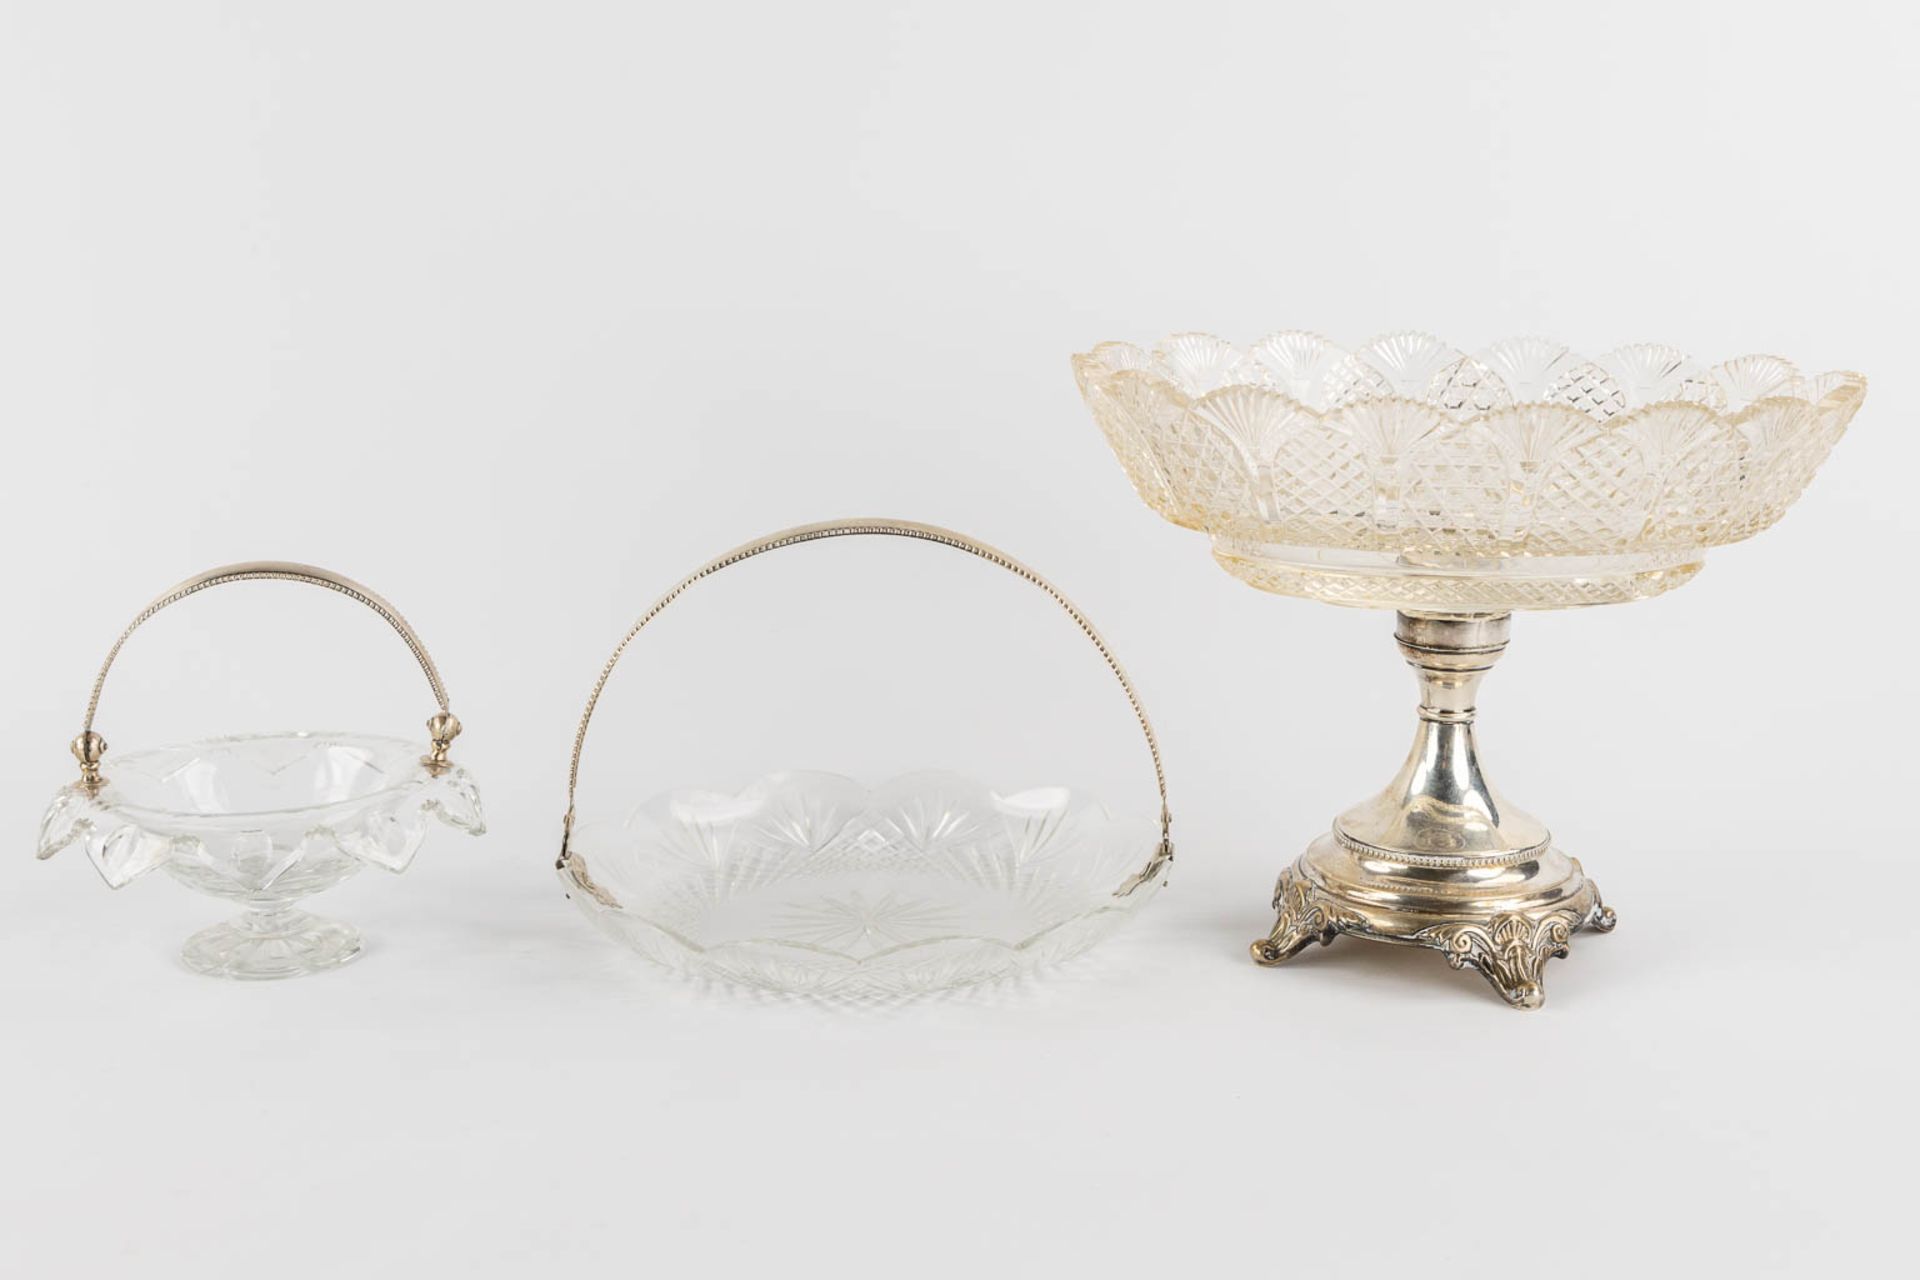 A large collection of silver and glass items, picture frames, serving ware and table accessories. 19 - Image 7 of 19